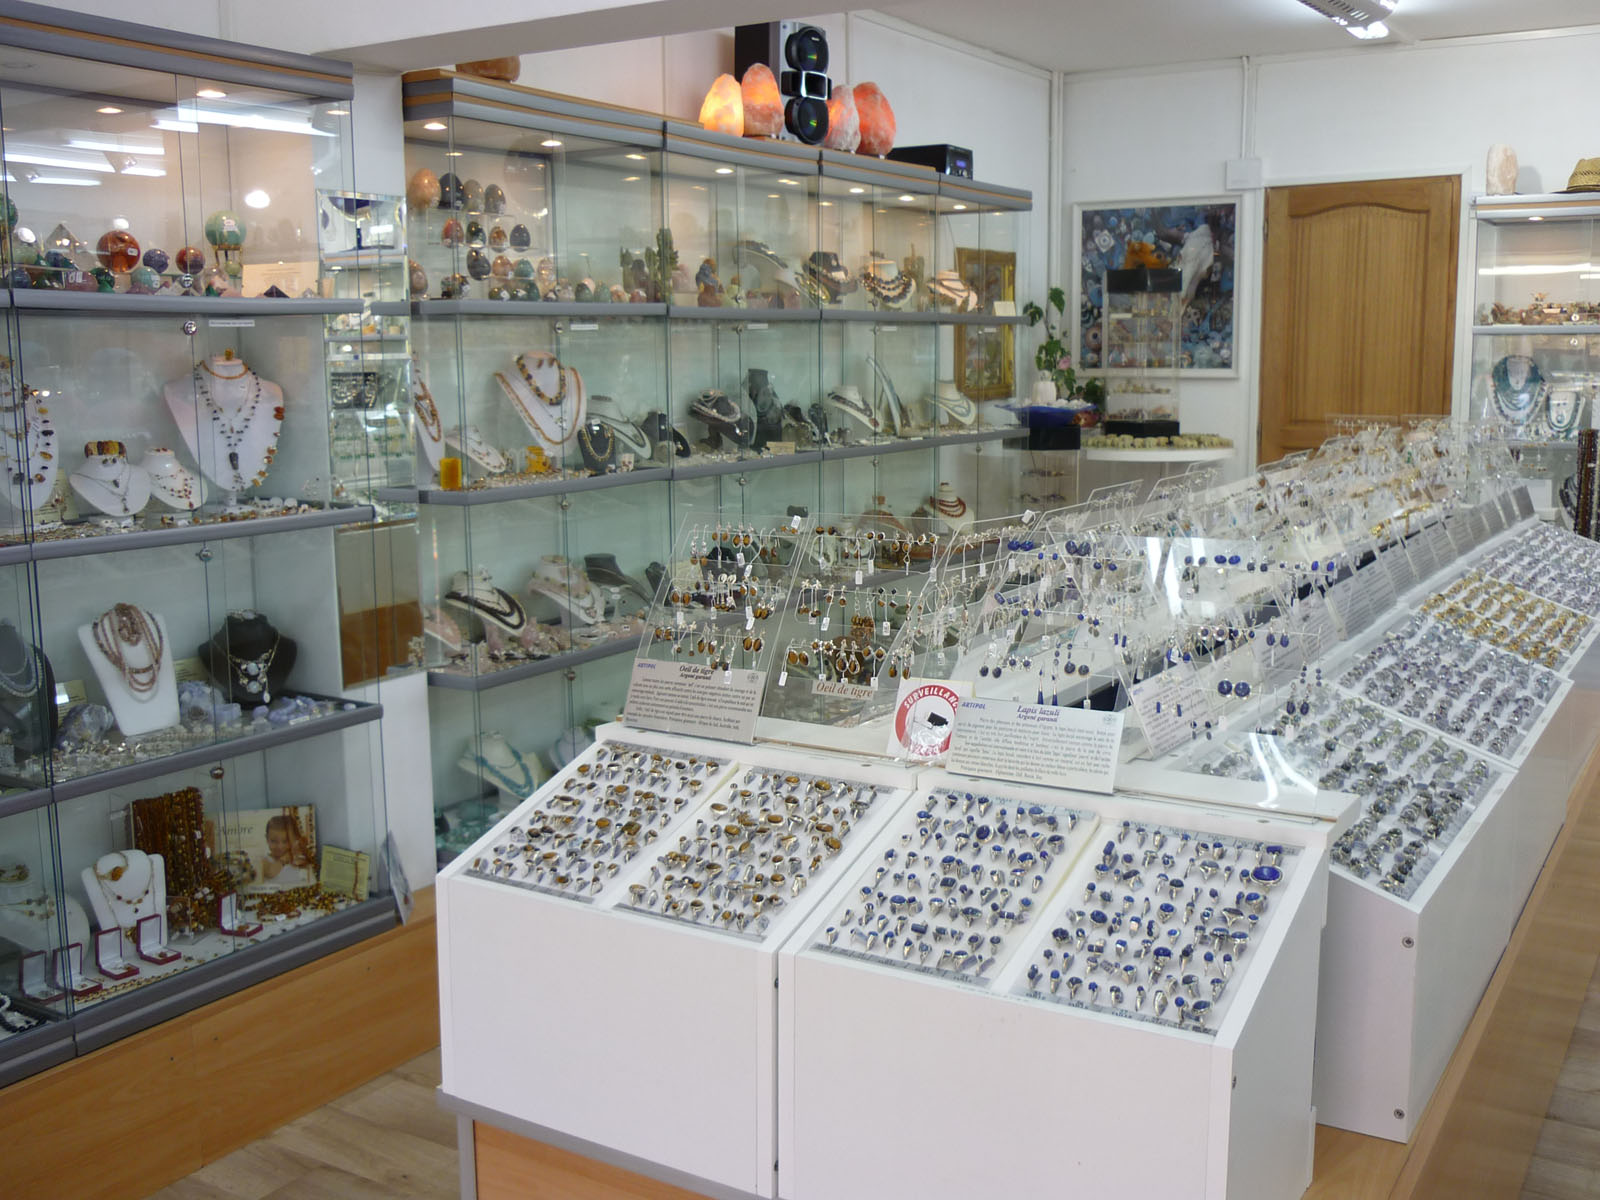 Jewelry gallery. Sale of jewelry in the store.